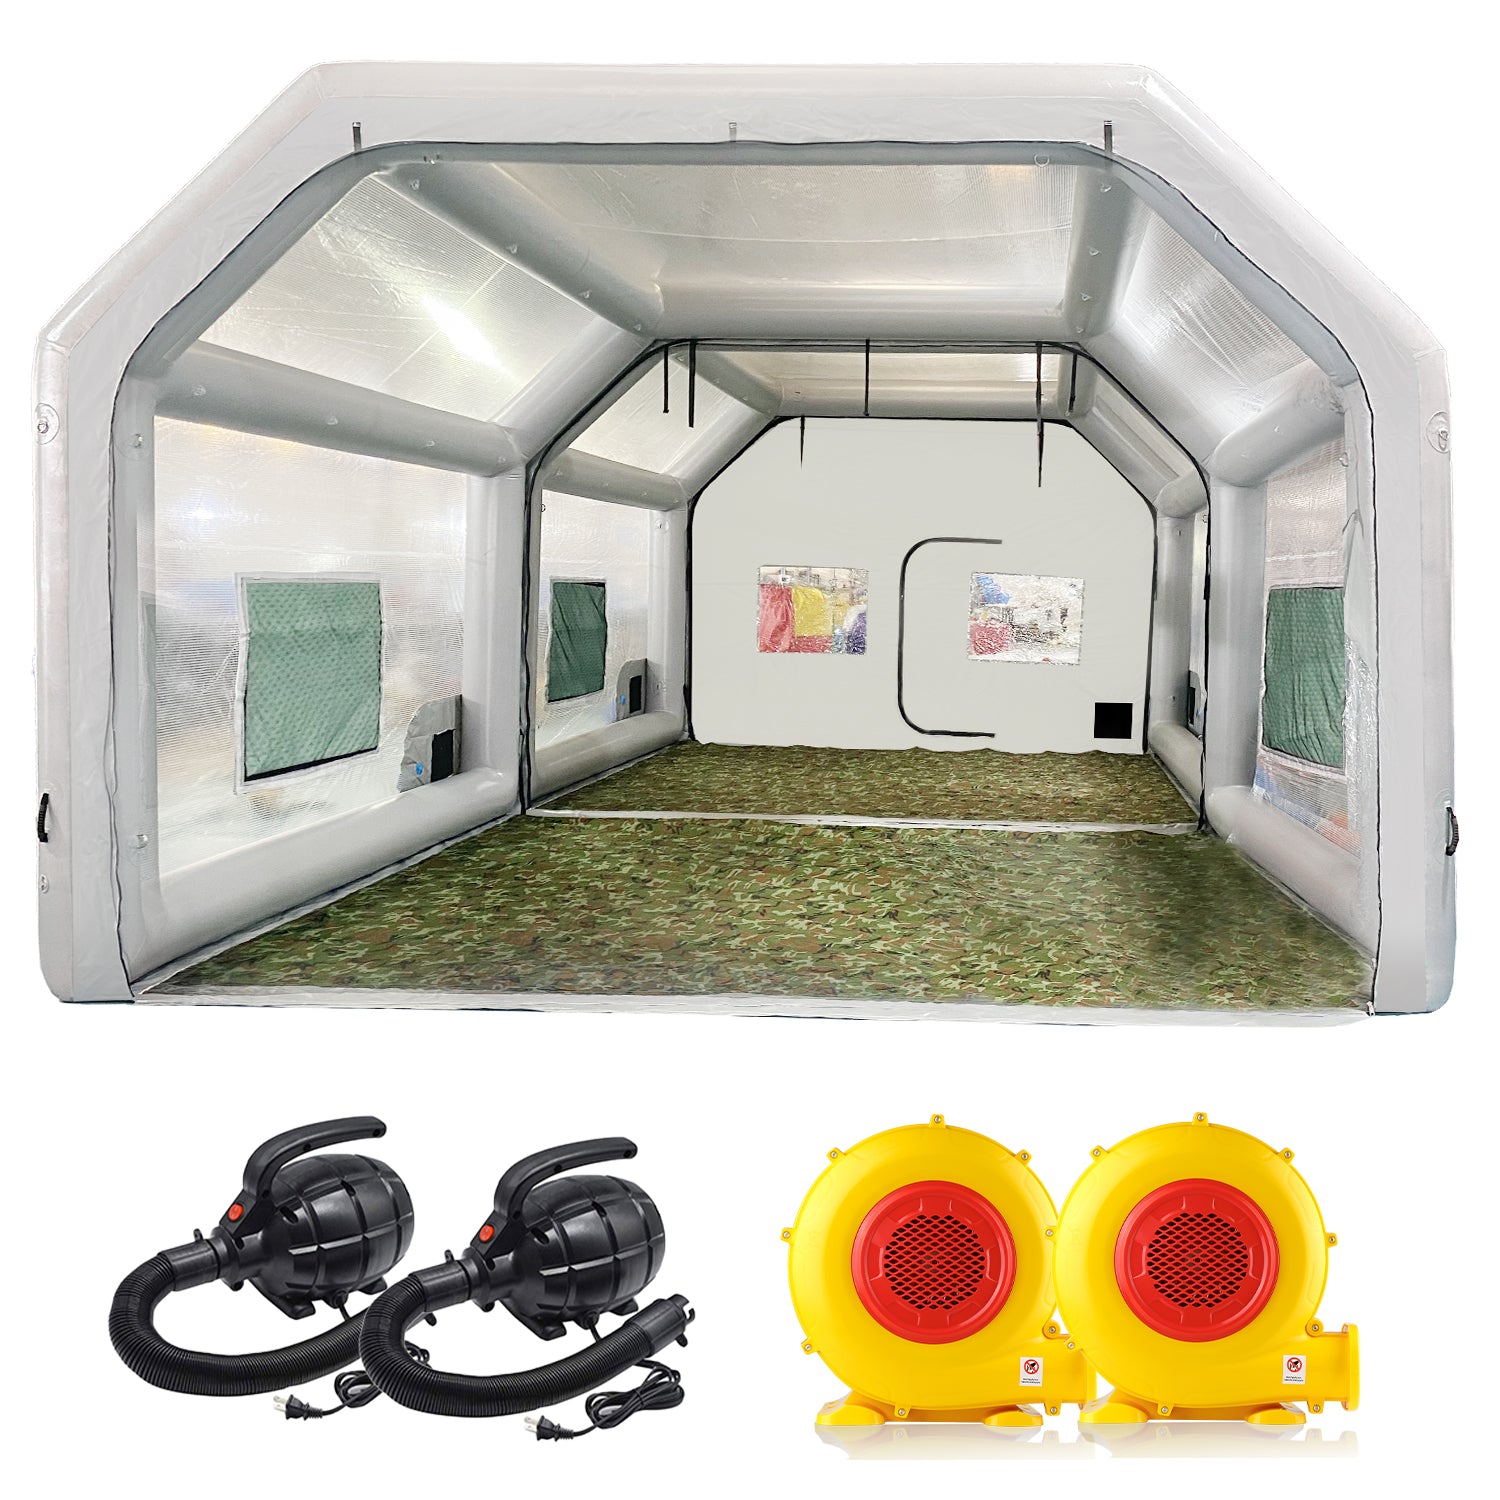 Sewinfla Airtight Waterproof Paint Booth 28x15x11FT with 2 Blowers  (950W+950W) -New Version Airtight Spray